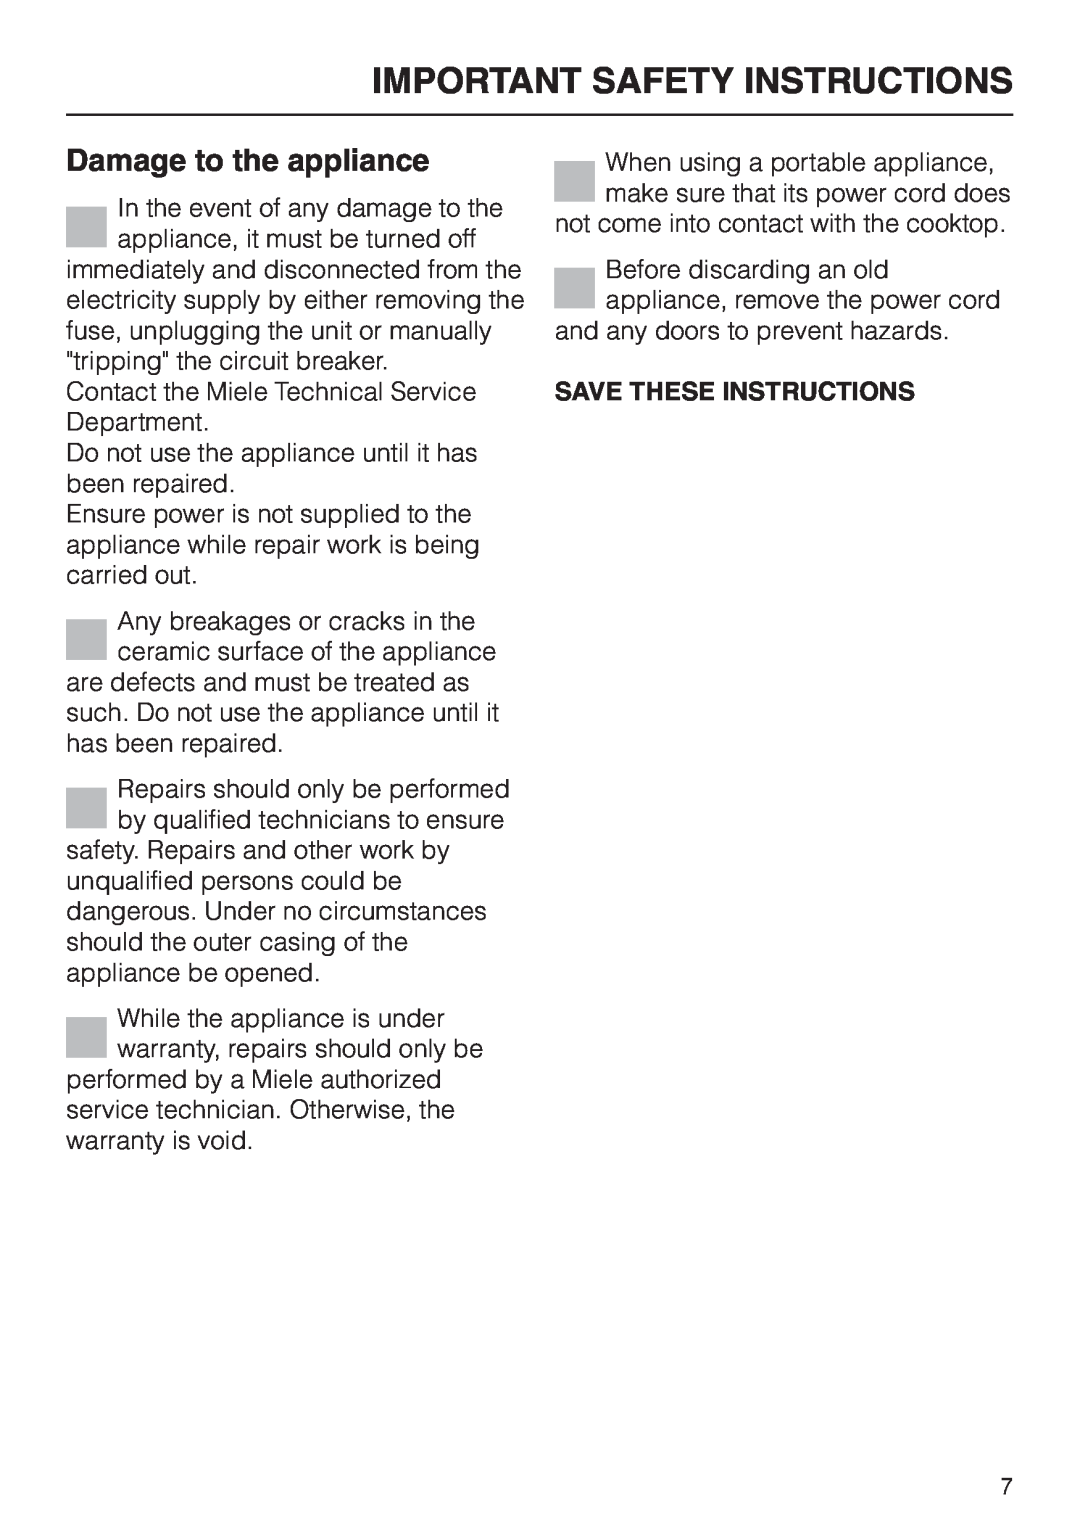 Miele KM400, KM412 operating instructions Damage to the appliance, Important Safety Instructions, Save These Instructions 